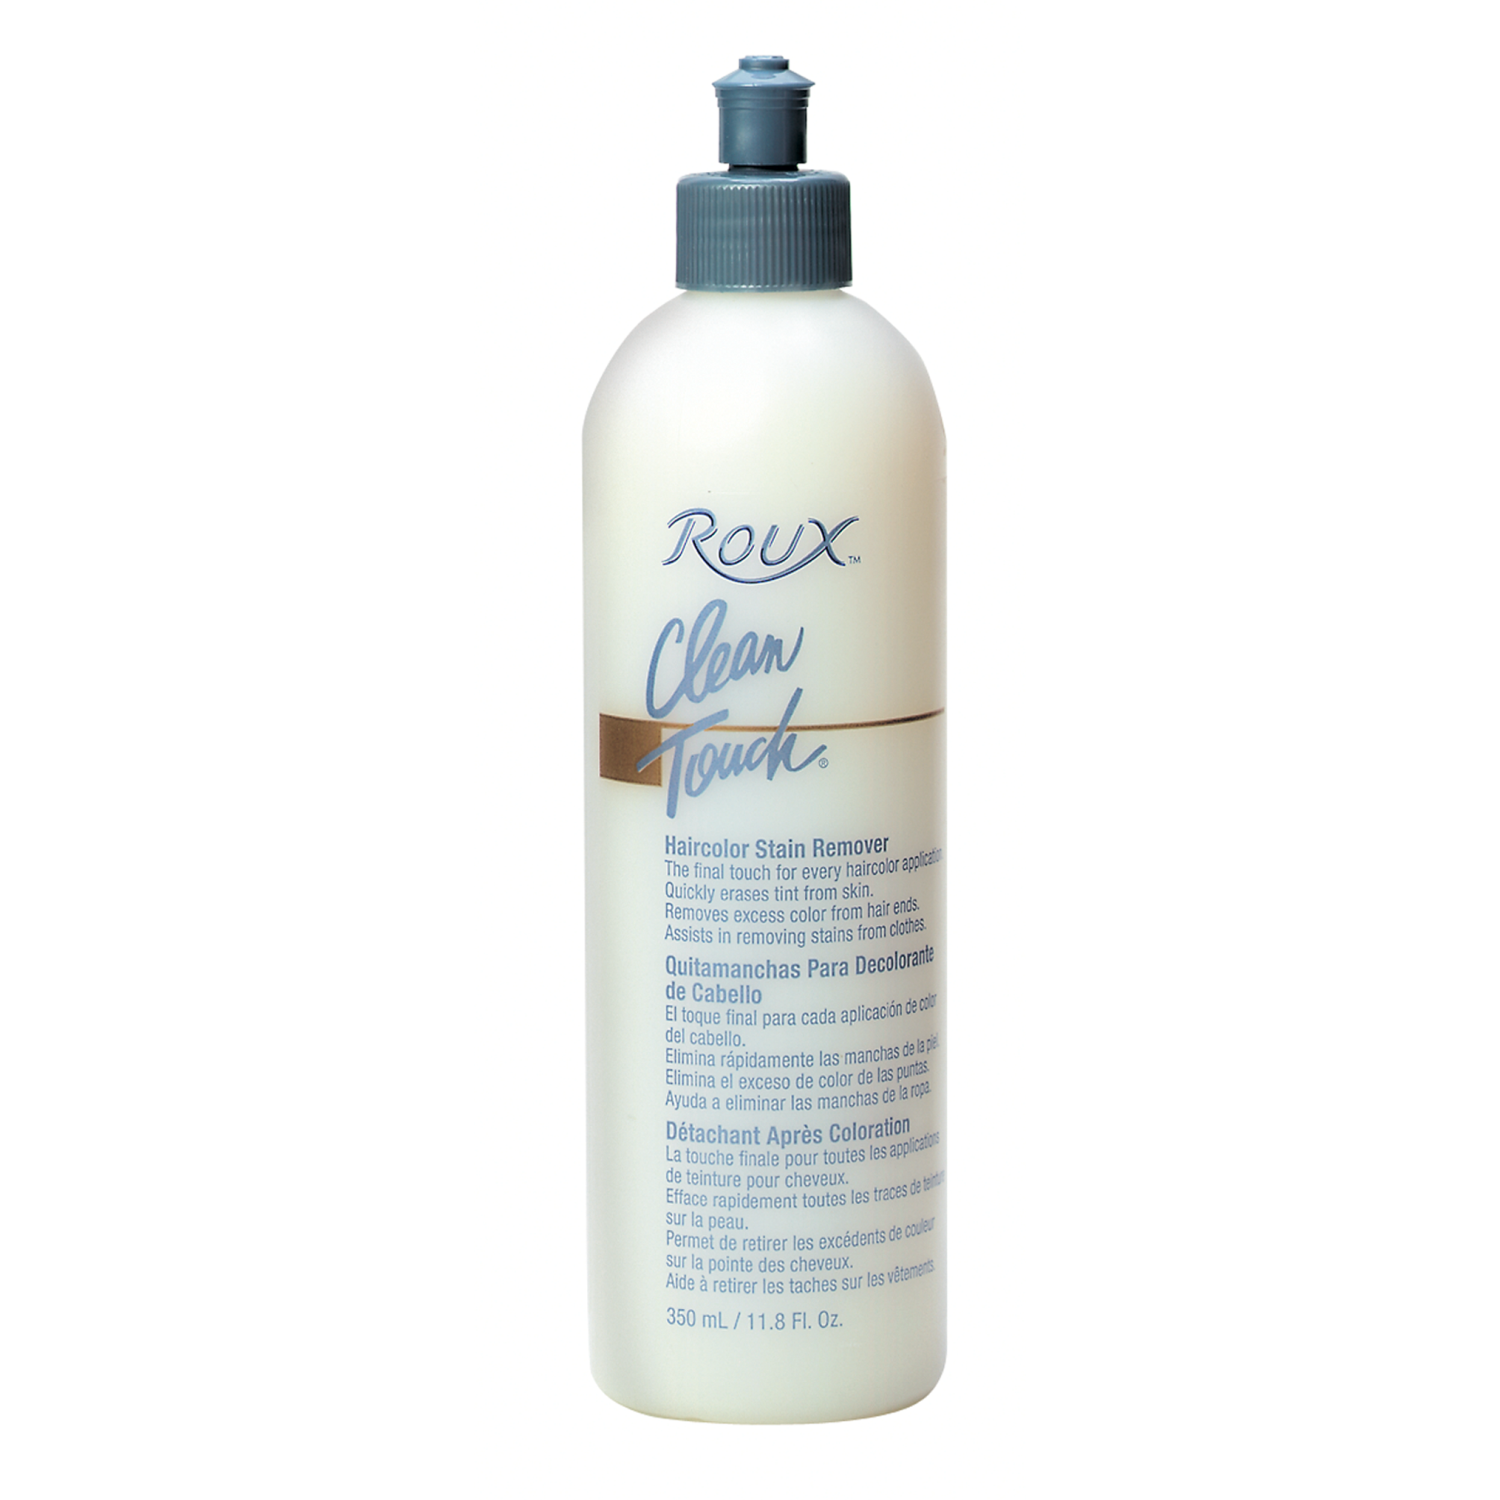 afsked kål tøj Roux Clean Touch Haircolor Stain Remover